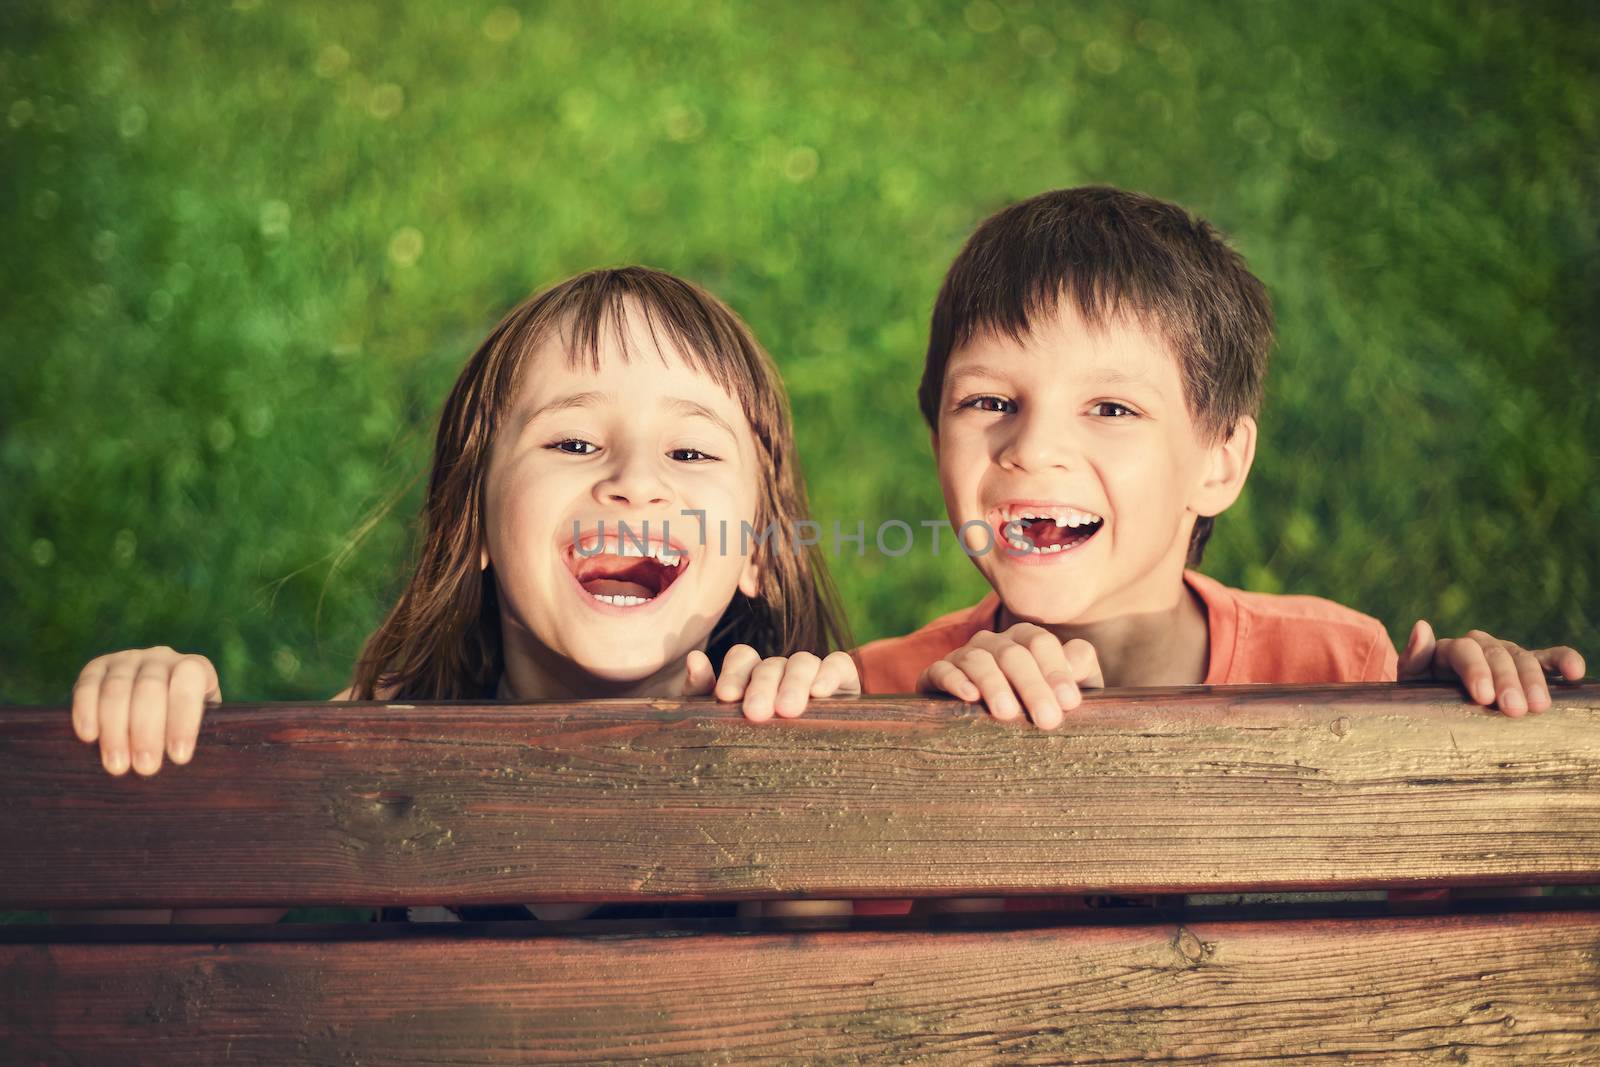 Outdoor portrait of smiling girl and boy who lost his milk teeth